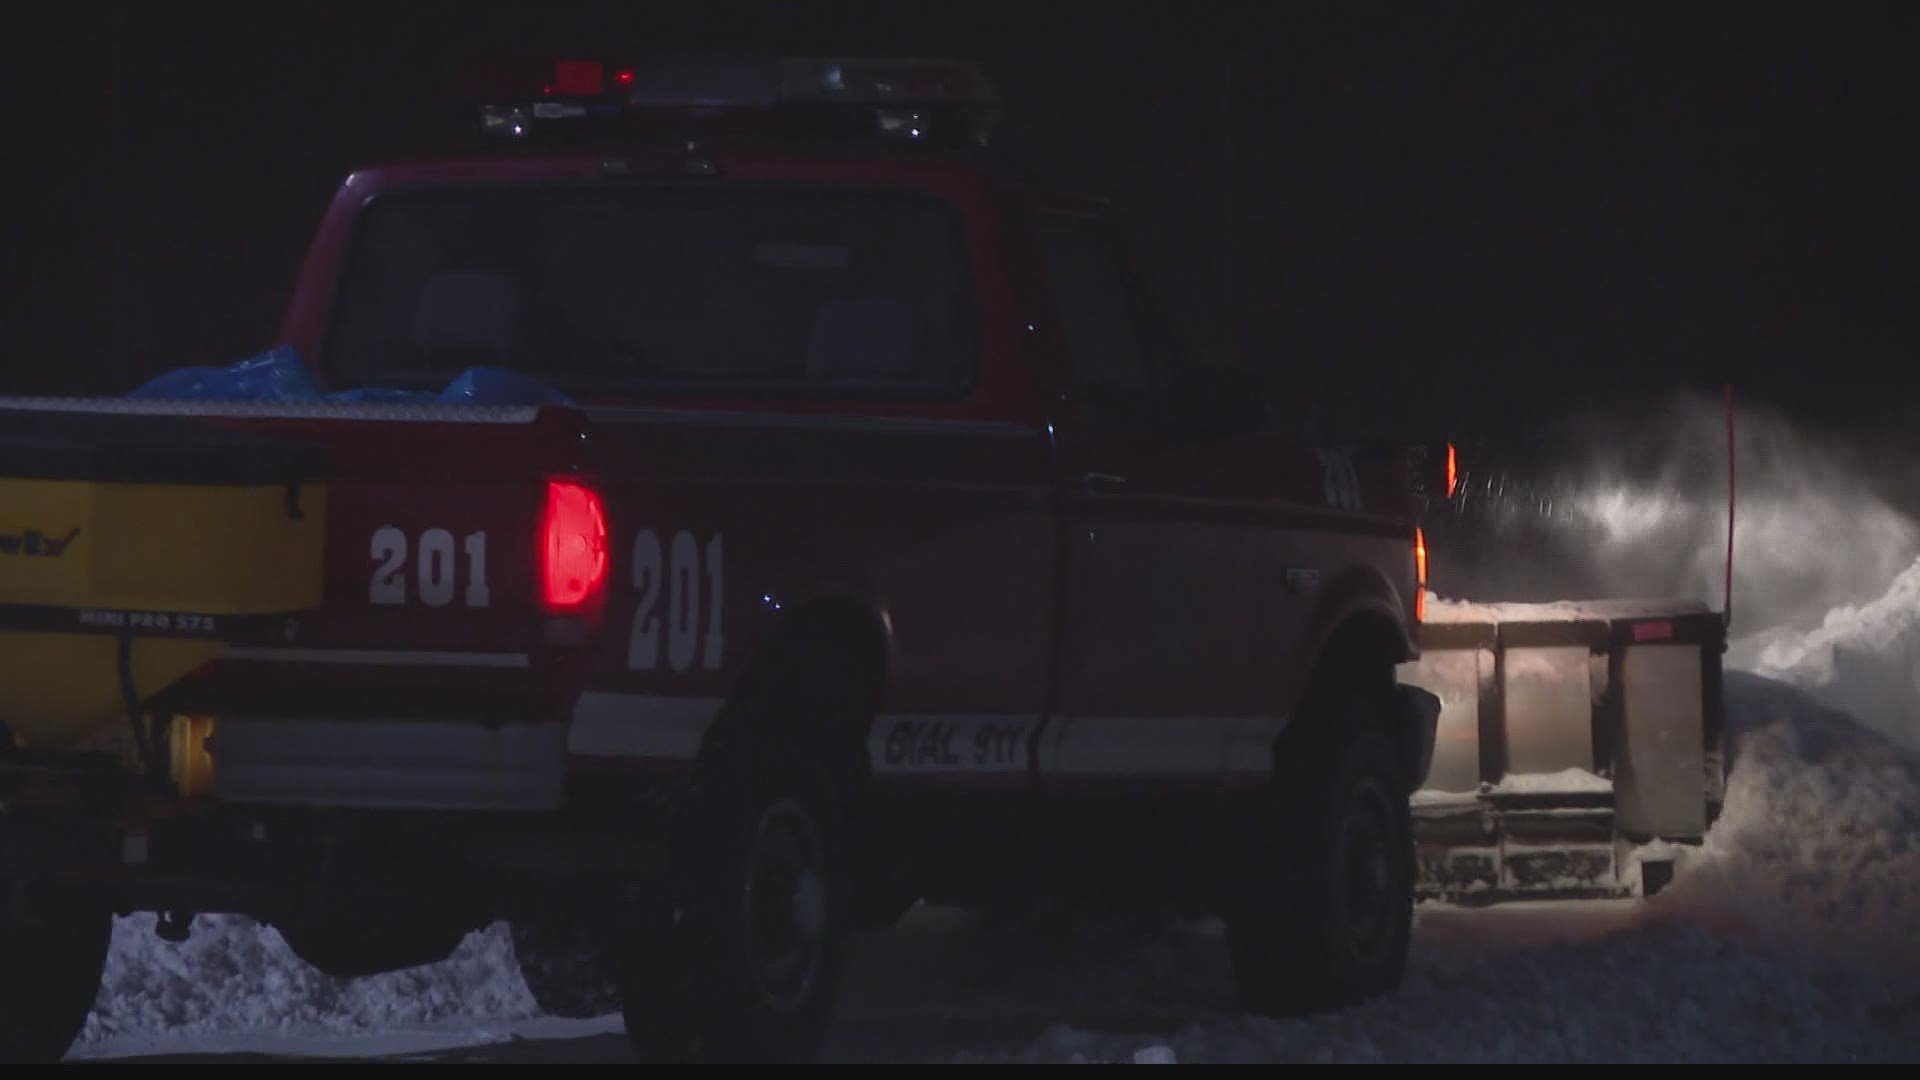 Emergency vehicles were being escorted by a plow-equipped truck in some areas Monday.